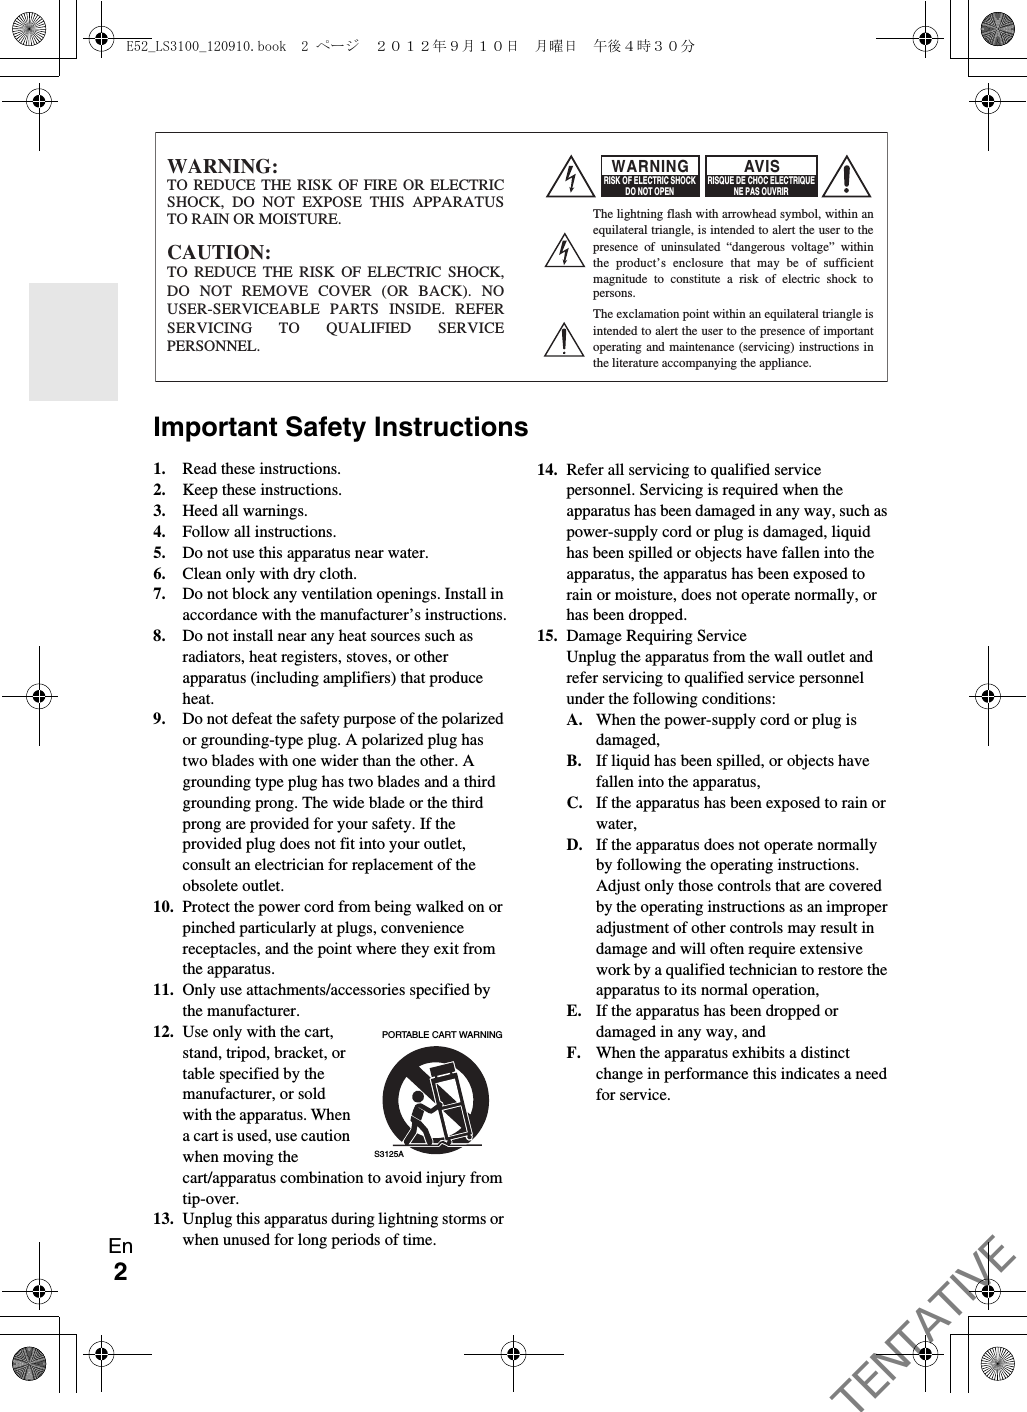 2EnBefore UseImportant Safety Instructions1. Read these instructions.2. Keep these instructions.3. Heed all warnings.4. Follow all instructions.5. Do not use this apparatus near water.6. Clean only with dry cloth.7. Do not block any ventilation openings. Install in accordance with the manufacturer’s instructions.8. Do not install near any heat sources such as radiators, heat registers, stoves, or other apparatus (including amplifiers) that produce heat.9. Do not defeat the safety purpose of the polarized or grounding-type plug. A polarized plug has two blades with one wider than the other. A grounding type plug has two blades and a third grounding prong. The wide blade or the third prong are provided for your safety. If the provided plug does not fit into your outlet, consult an electrician for replacement of the obsolete outlet.10. Protect the power cord from being walked on or pinched particularly at plugs, convenience receptacles, and the point where they exit from the apparatus.11. Only use attachments/accessories specified by the manufacturer.12. Use only with the cart, stand, tripod, bracket, or table specified by the manufacturer, or sold with the apparatus. When a cart is used, use caution when moving the cart/apparatus combination to avoid injury from tip-over.13. Unplug this apparatus during lightning storms or when unused for long periods of time.14. Refer all servicing to qualified service personnel. Servicing is required when the apparatus has been damaged in any way, such as power-supply cord or plug is damaged, liquid has been spilled or objects have fallen into the apparatus, the apparatus has been exposed to rain or moisture, does not operate normally, or has been dropped.15. Damage Requiring ServiceUnplug the apparatus from the wall outlet and refer servicing to qualified service personnel under the following conditions:A. When the power-supply cord or plug is damaged,B. If liquid has been spilled, or objects have fallen into the apparatus,C. If the apparatus has been exposed to rain or water,D. If the apparatus does not operate normally by following the operating instructions. Adjust only those controls that are covered by the operating instructions as an improper adjustment of other controls may result in damage and will often require extensive work by a qualified technician to restore the apparatus to its normal operation,E. If the apparatus has been dropped or damaged in any way, andF. When the apparatus exhibits a distinct change in performance this indicates a need for service.WARNING:TO REDUCE THE RISK OF FIRE OR ELECTRIC SHOCK, DO NOT EXPOSE THIS APPARATUS TO RAIN OR MOISTURE.CAUTION:TO REDUCE THE RISK OF ELECTRIC SHOCK, DO NOT REMOVE COVER (OR BACK). NO USER-SERVICEABLE PARTS INSIDE. REFER SERVICING TO QUALIFIED SERVICE PERSONNEL.The lightning flash with arrowhead symbol, within an equilateral triangle, is intended to alert the user to the presence of uninsulated “dangerous voltage” within the product’s enclosure that may be of sufficient magnitude to constitute a risk of electric shock to persons.The exclamation point within an equilateral triangle is intended to alert the user to the presence of important operating and maintenance (servicing) instructions in the literature accompanying the appliance.WARNINGRISK OF ELECTRIC SHOCKDO NOT OPENRISQUE DE CHOC ELECTRIQUENE PAS OUVRIRAVIS  PORTABLE CART WARNINGS3125AE52_LS3100_120910.book  2 ページ  ２０１２年９月１０日　月曜日　午後４時３０分TENTATIVE